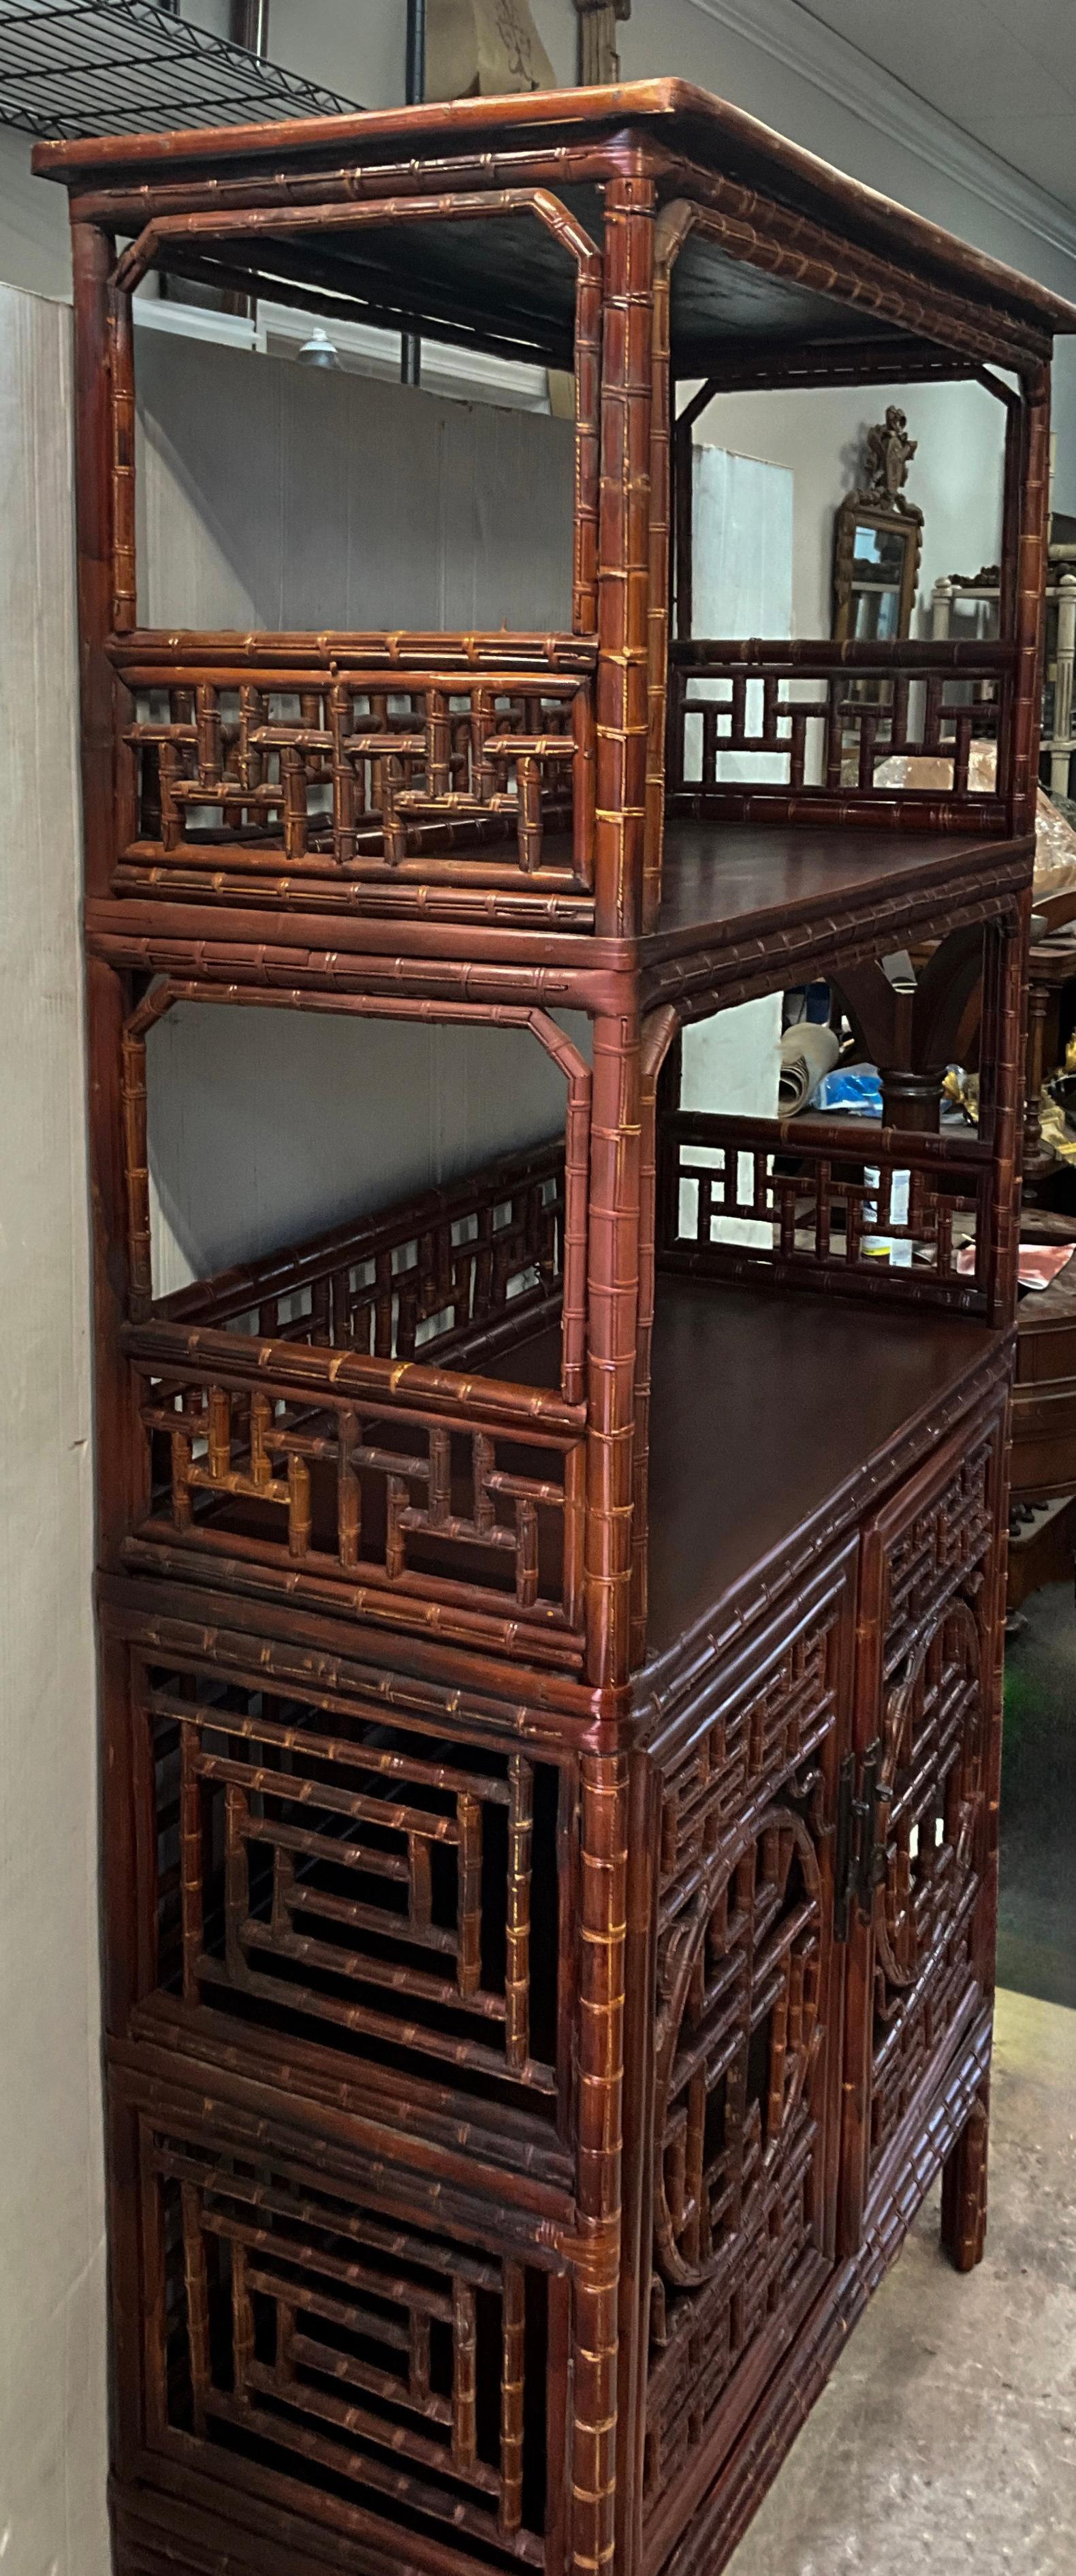 Early 20th-C. Chinese Bamboo Cabinet / Etagere / Bookcase With Ornate Fretwork  In Good Condition For Sale In Kennesaw, GA